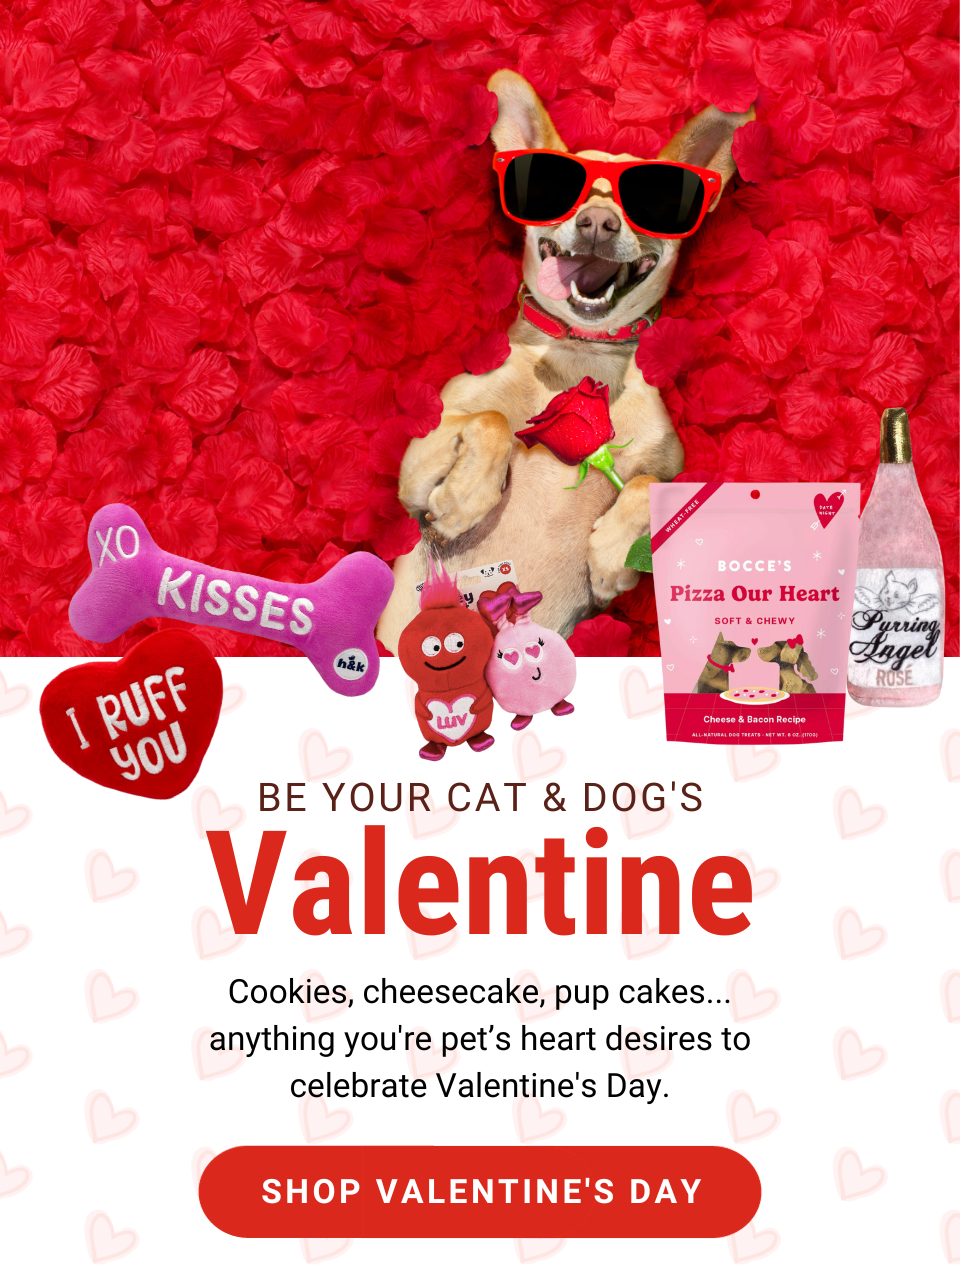 Be your cat & dog's valentine! Cookies, cheesecake, pup cakes, anything you're pet's heart desires to celebrate Valentine's Day! Shop Now!